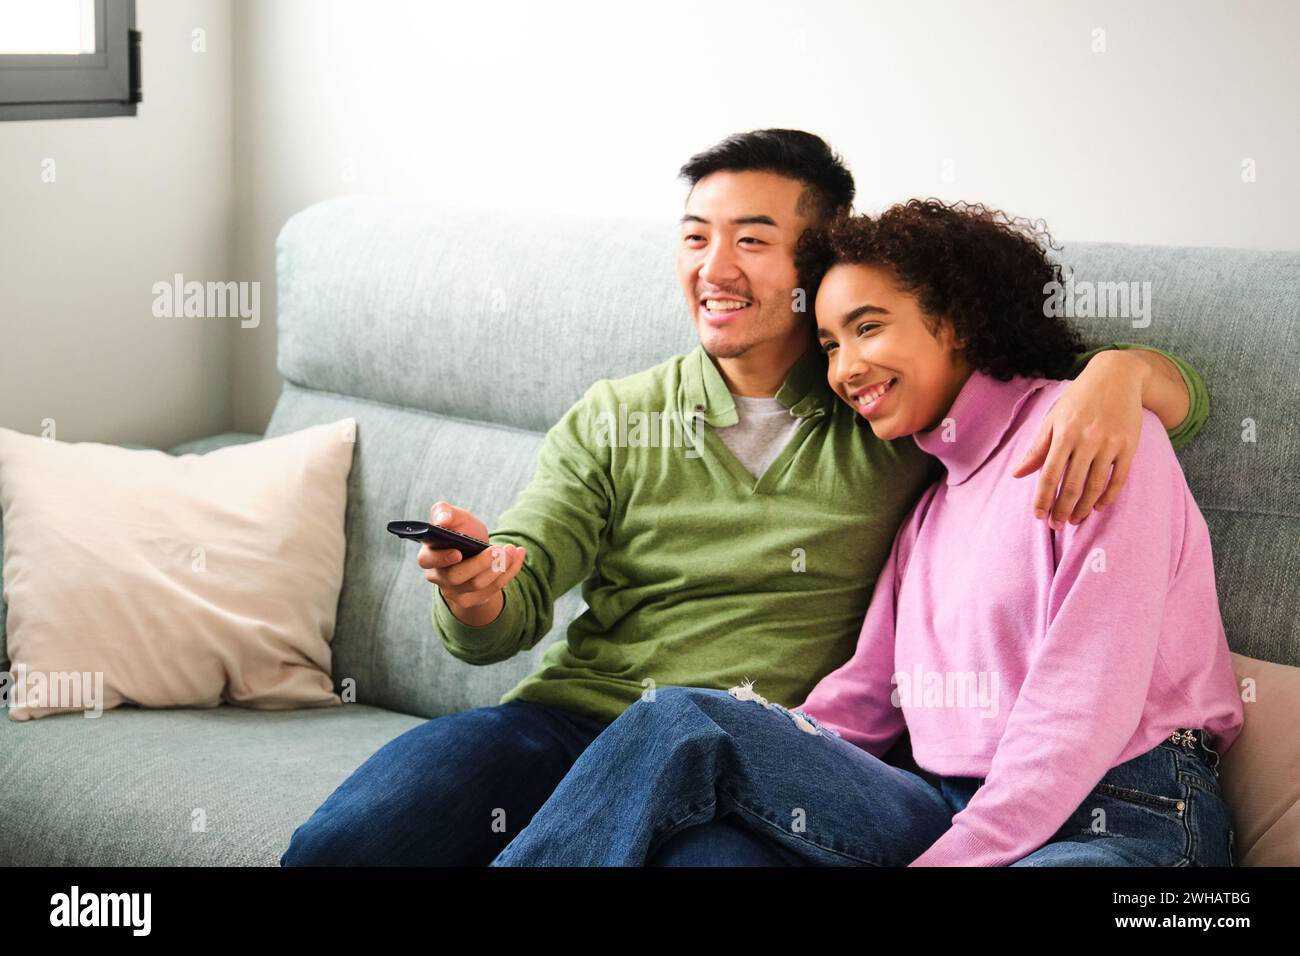 Multiethnic couple smile and watch TV, movie or film together on sofa. Stock Photo